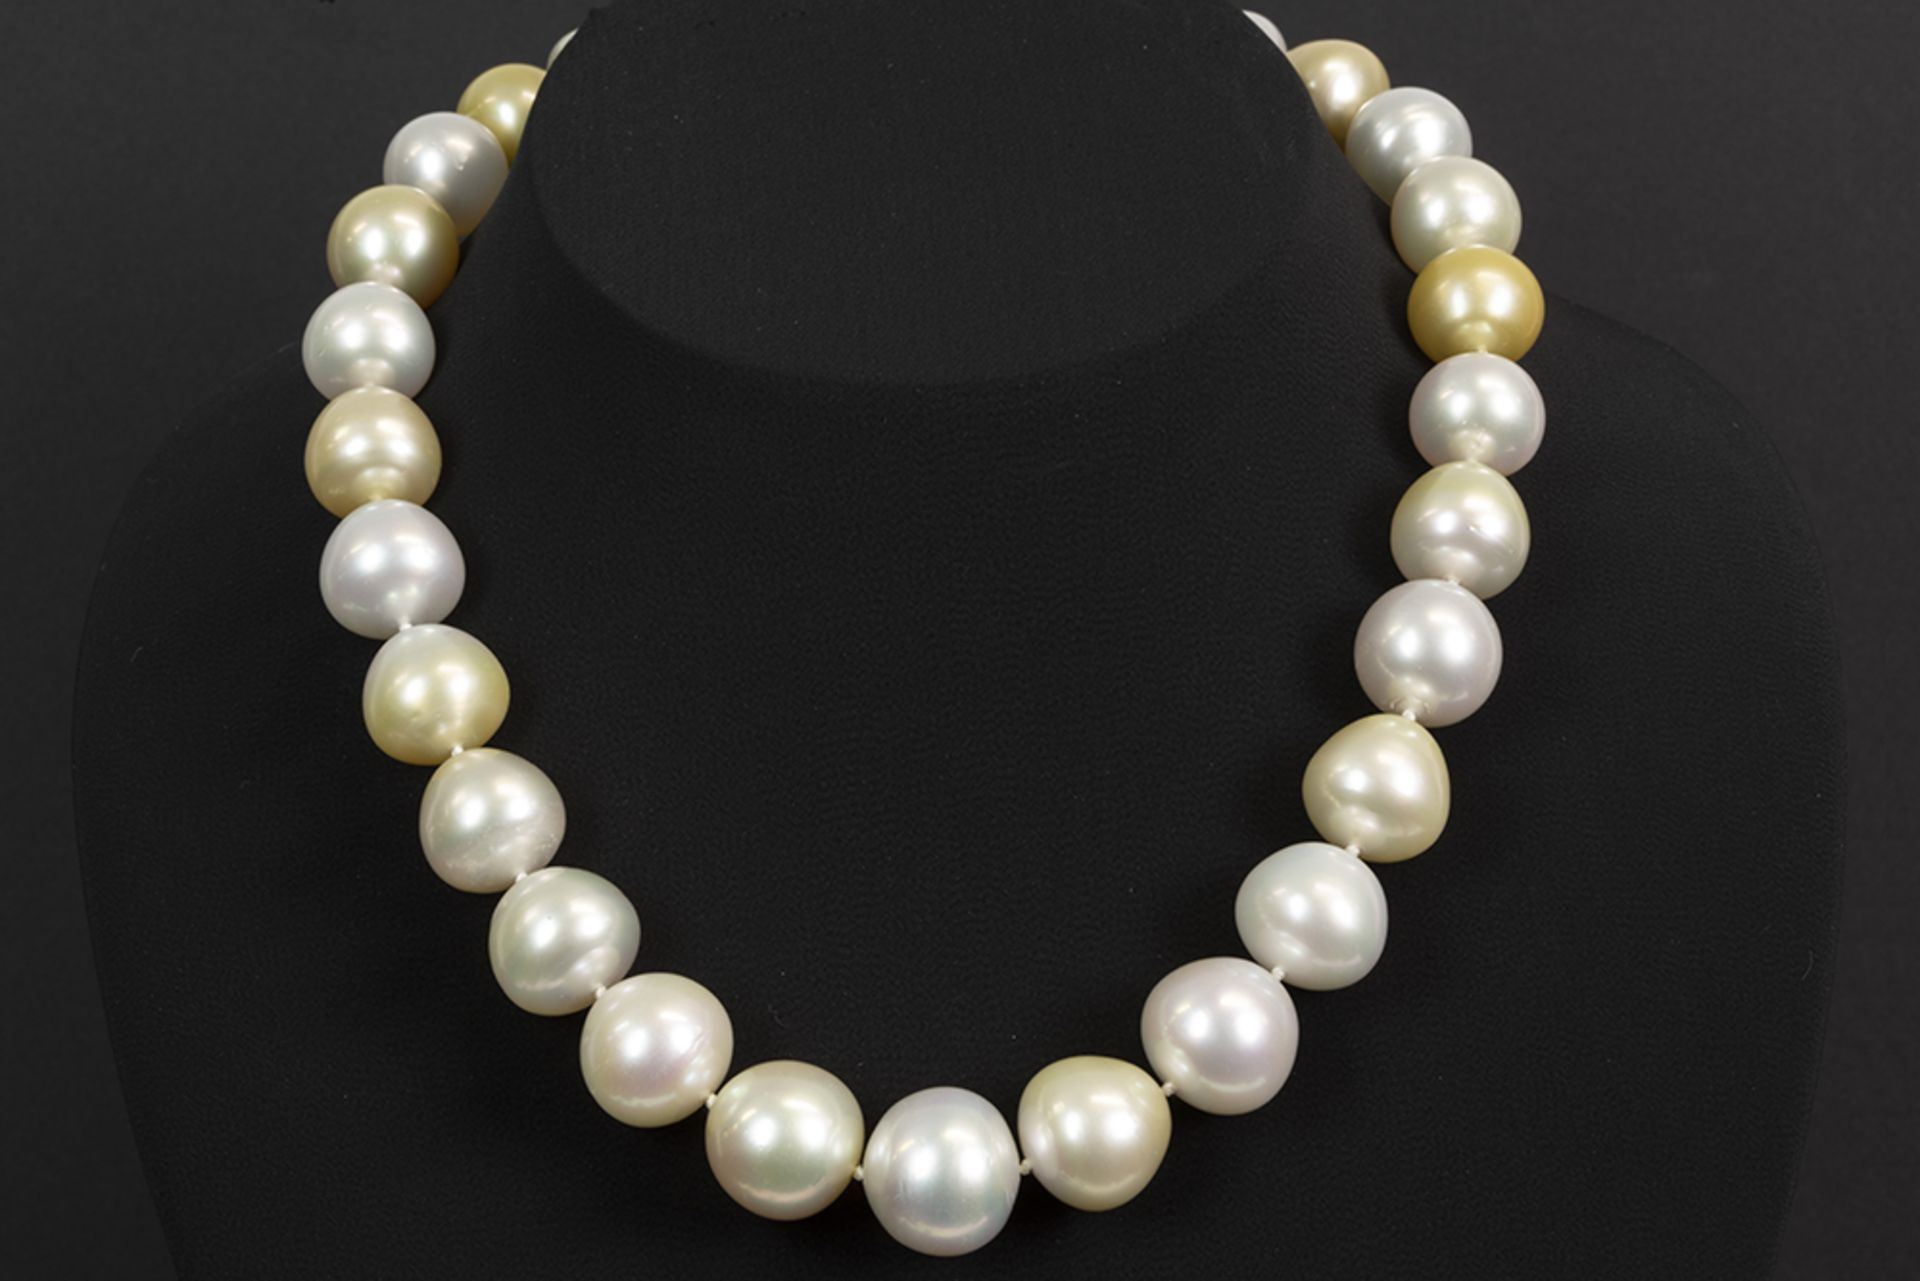 superb and rare necklace with big South Sea pearls and with a in two pearls hidden lock || Superb en